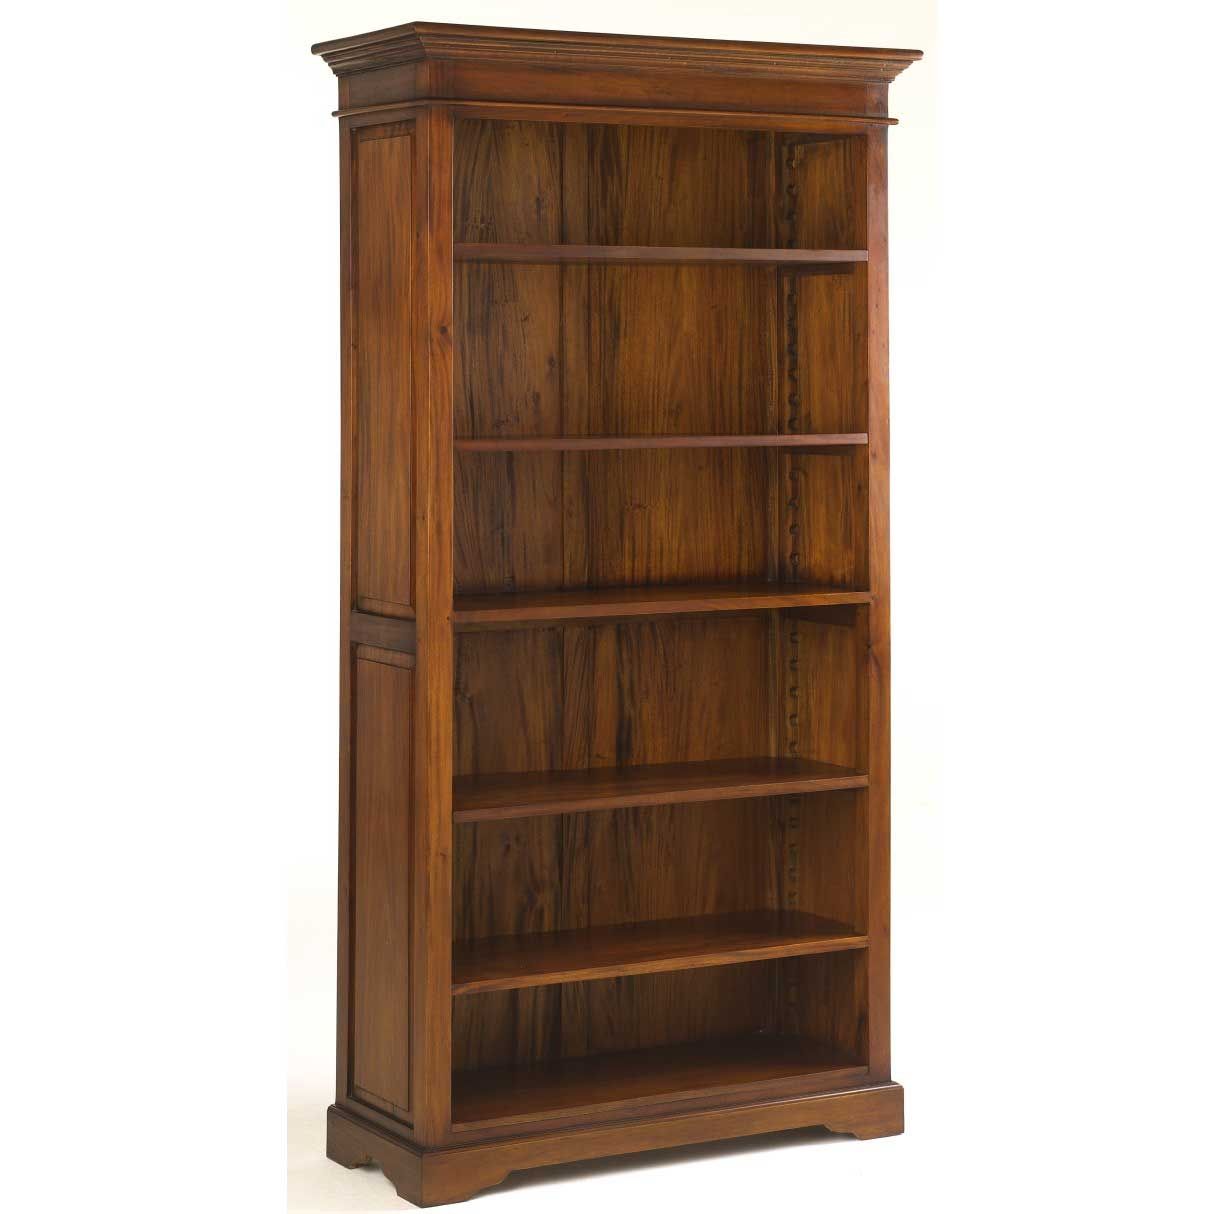 Bookcases Ideas Ten Real Wood Bookcases With High Quality Regarding High Quality Bookcases (View 5 of 15)